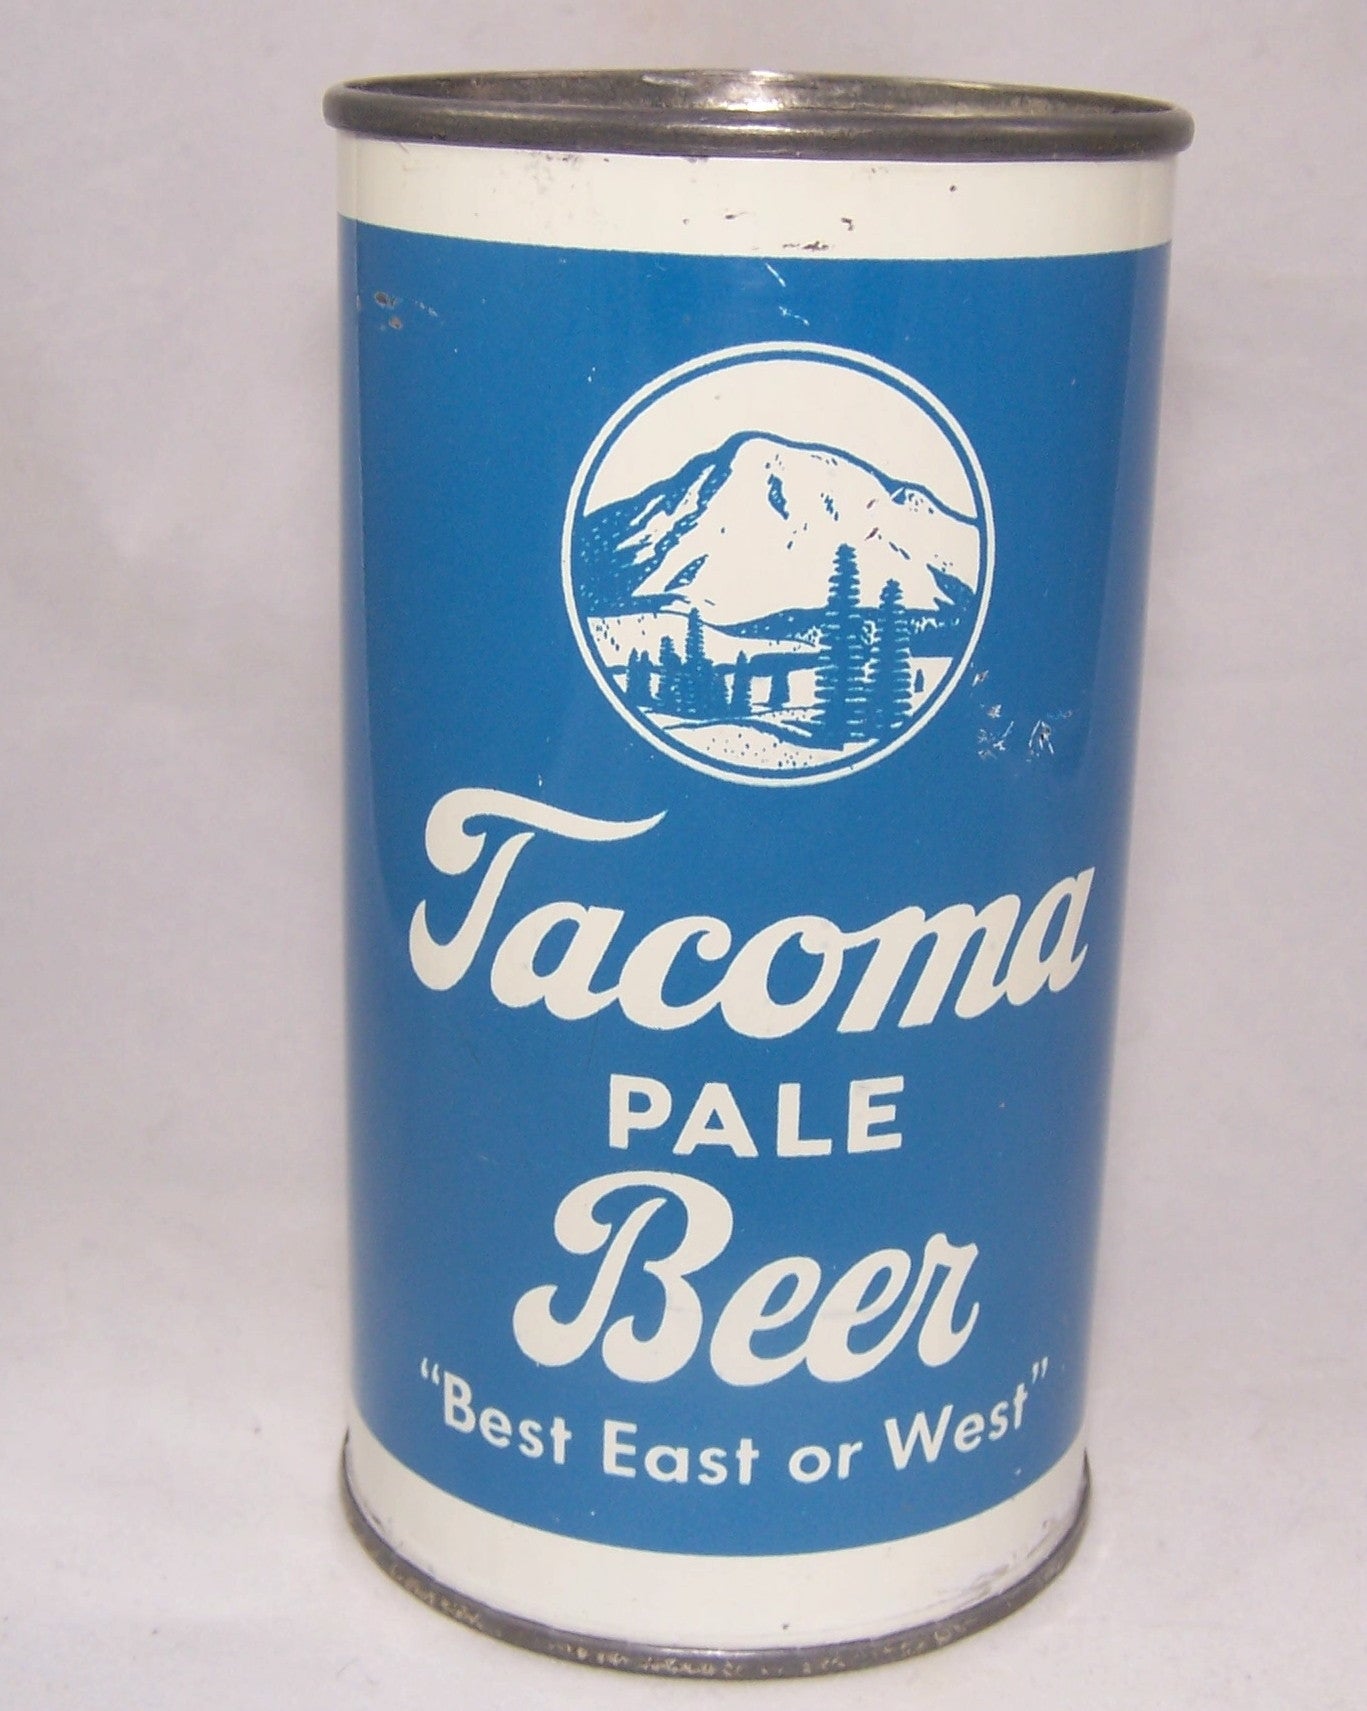 Tacoma Pale Beer, USBC 138-07, Grade 1/1+ Sold on 05/15/18